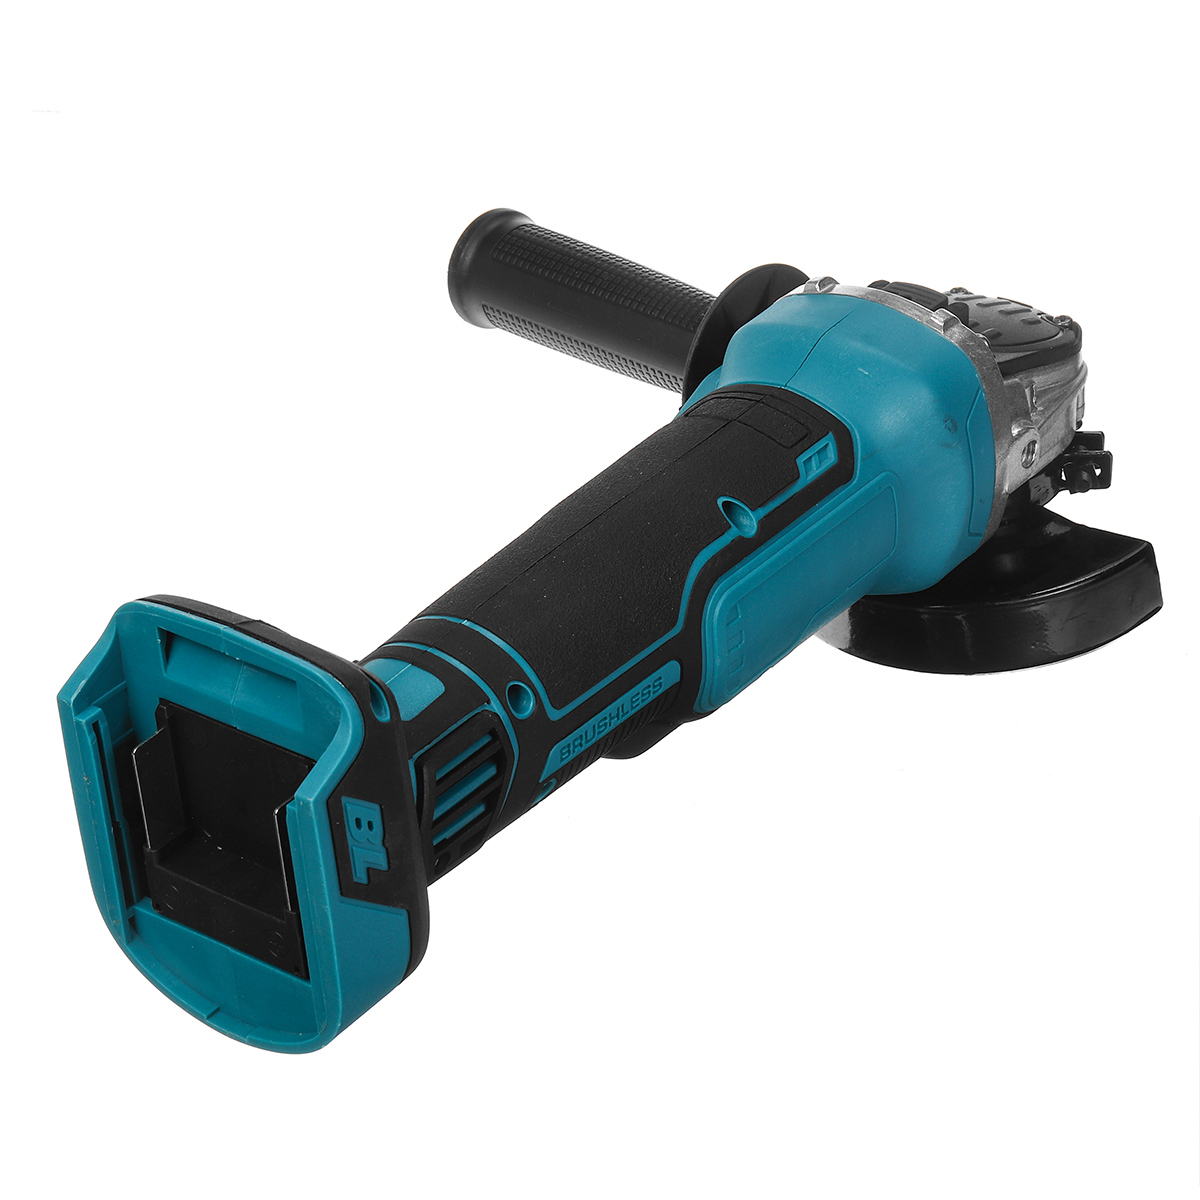 Electric-Brushless-Cordless-Angle-Grinder-M10-125mm-Cut-for-Makita-18V-Battery-1791879-10